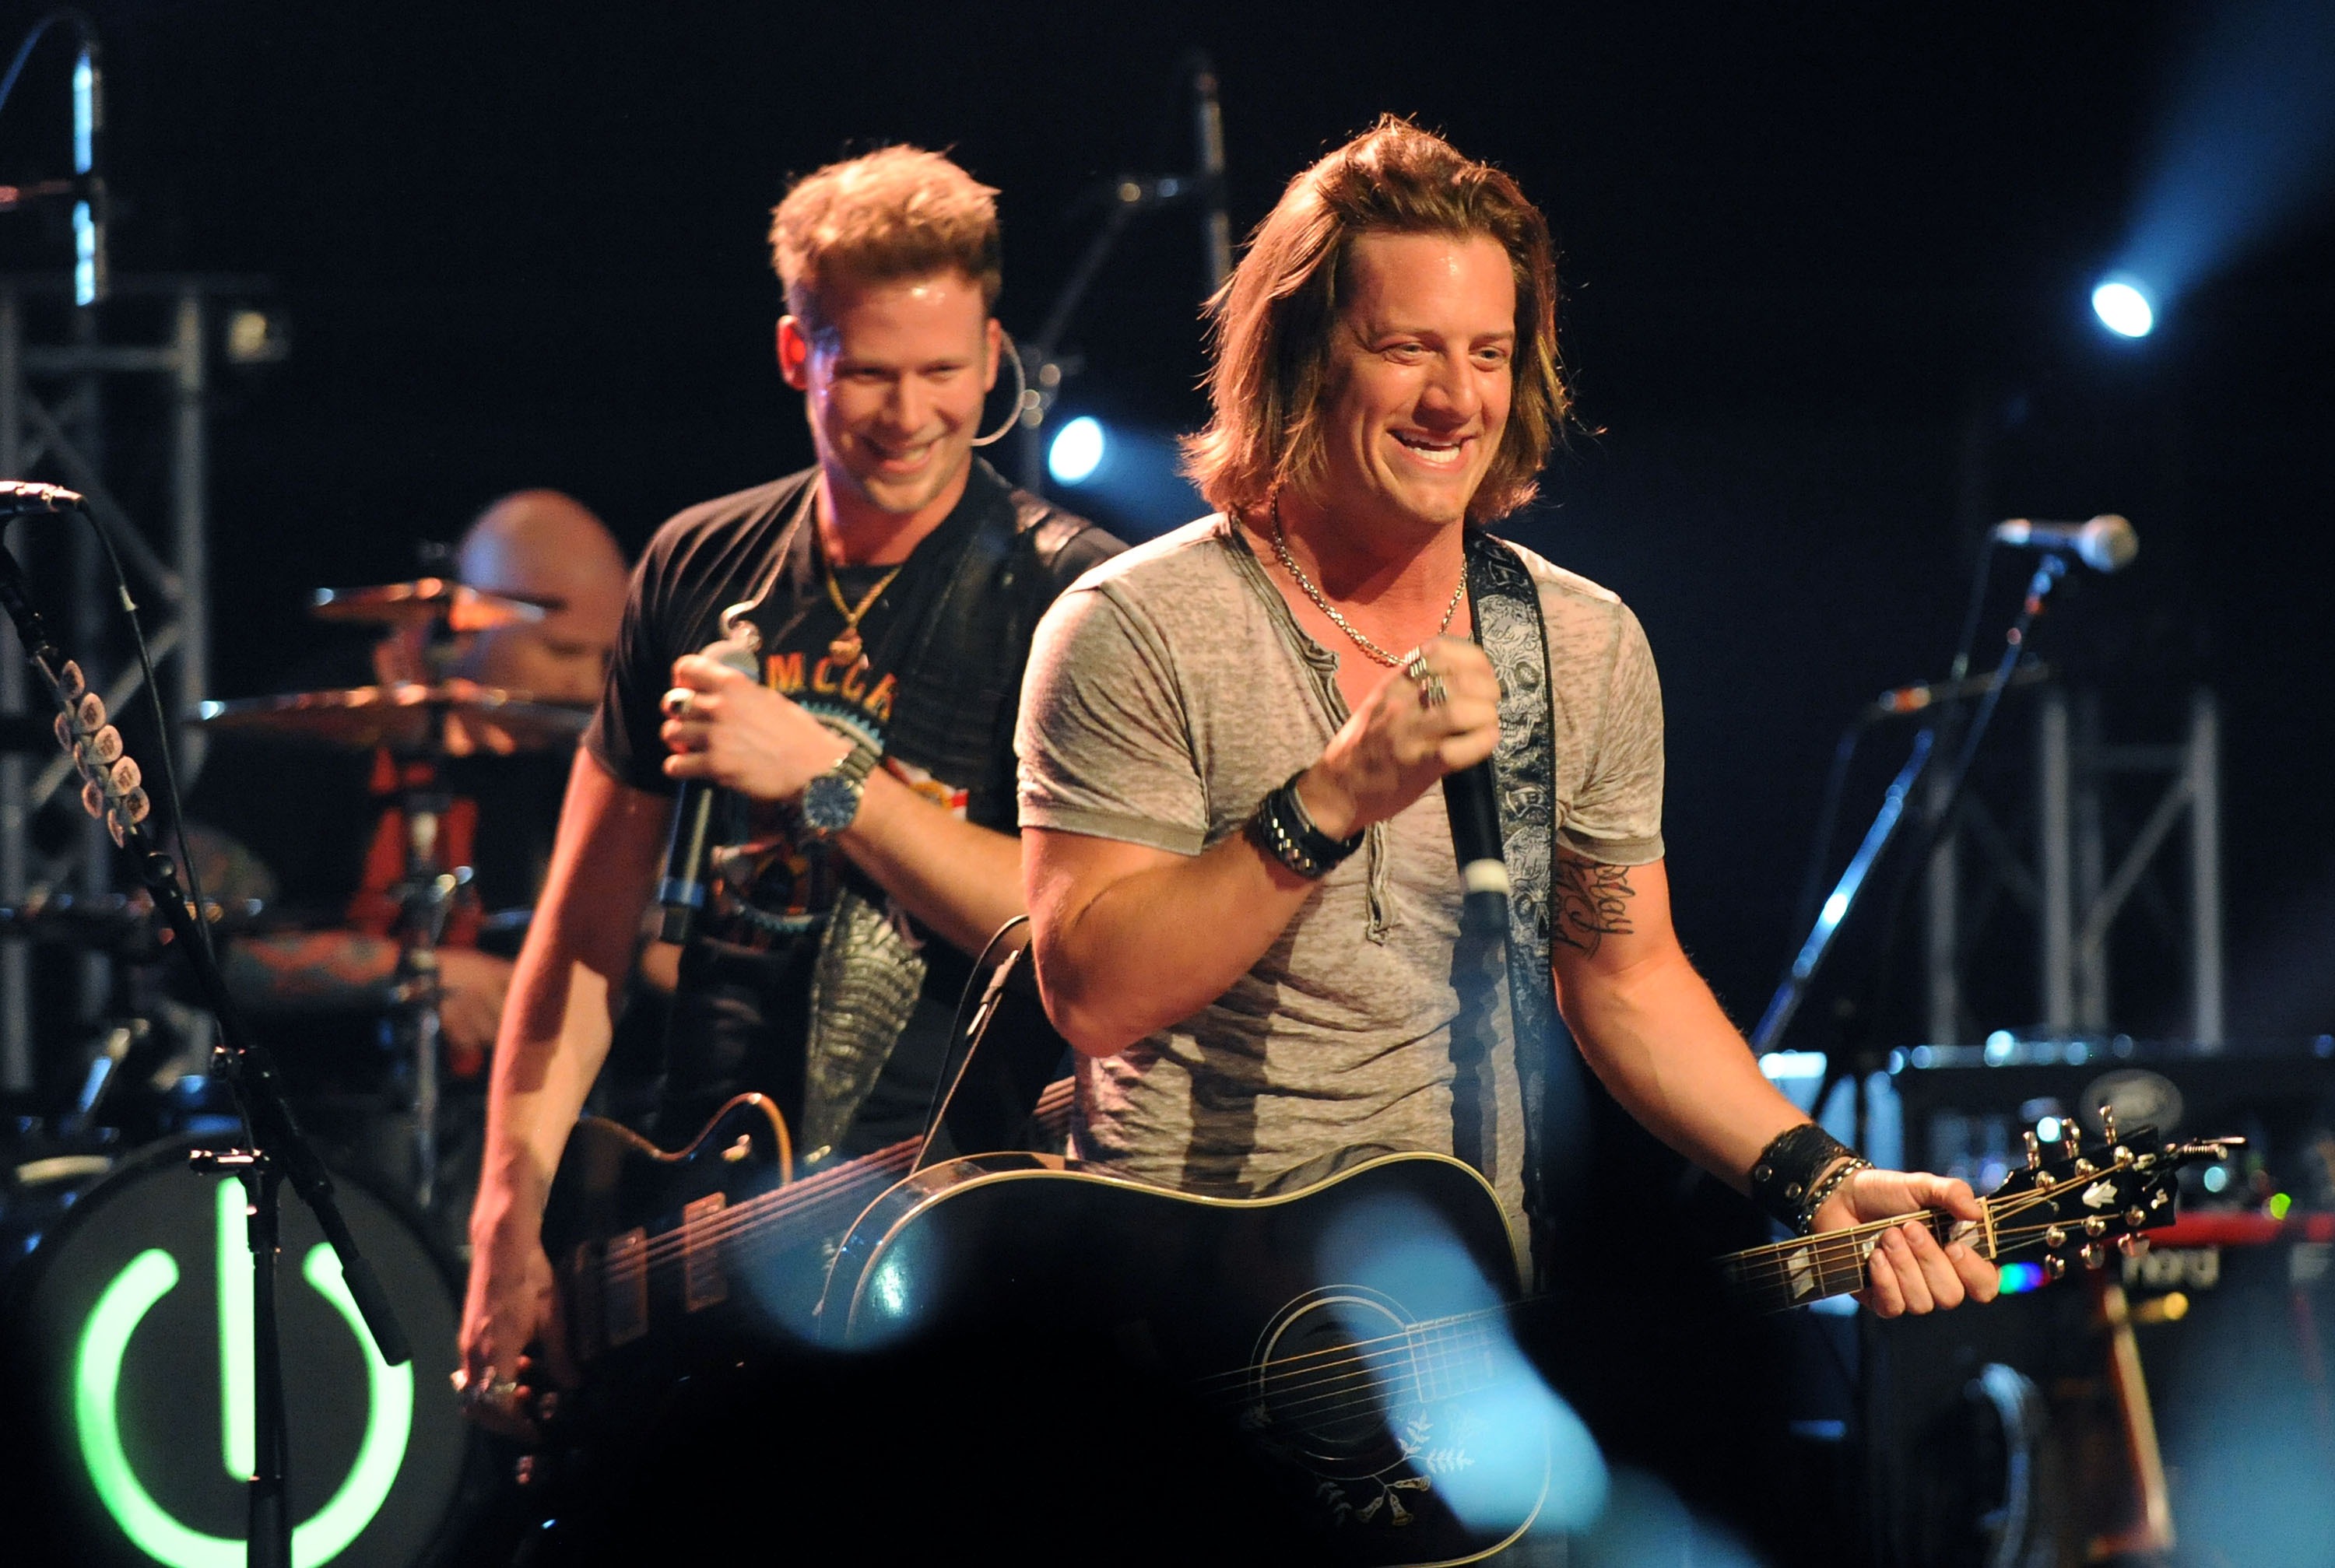 From left: Brian Kelley and Tyler Hubbard of Florida Georgia Line perform at the Georgia Theatre on March 20, 2013 in Athens, Ga. (Chris McKay—WireImage/Getty Images)